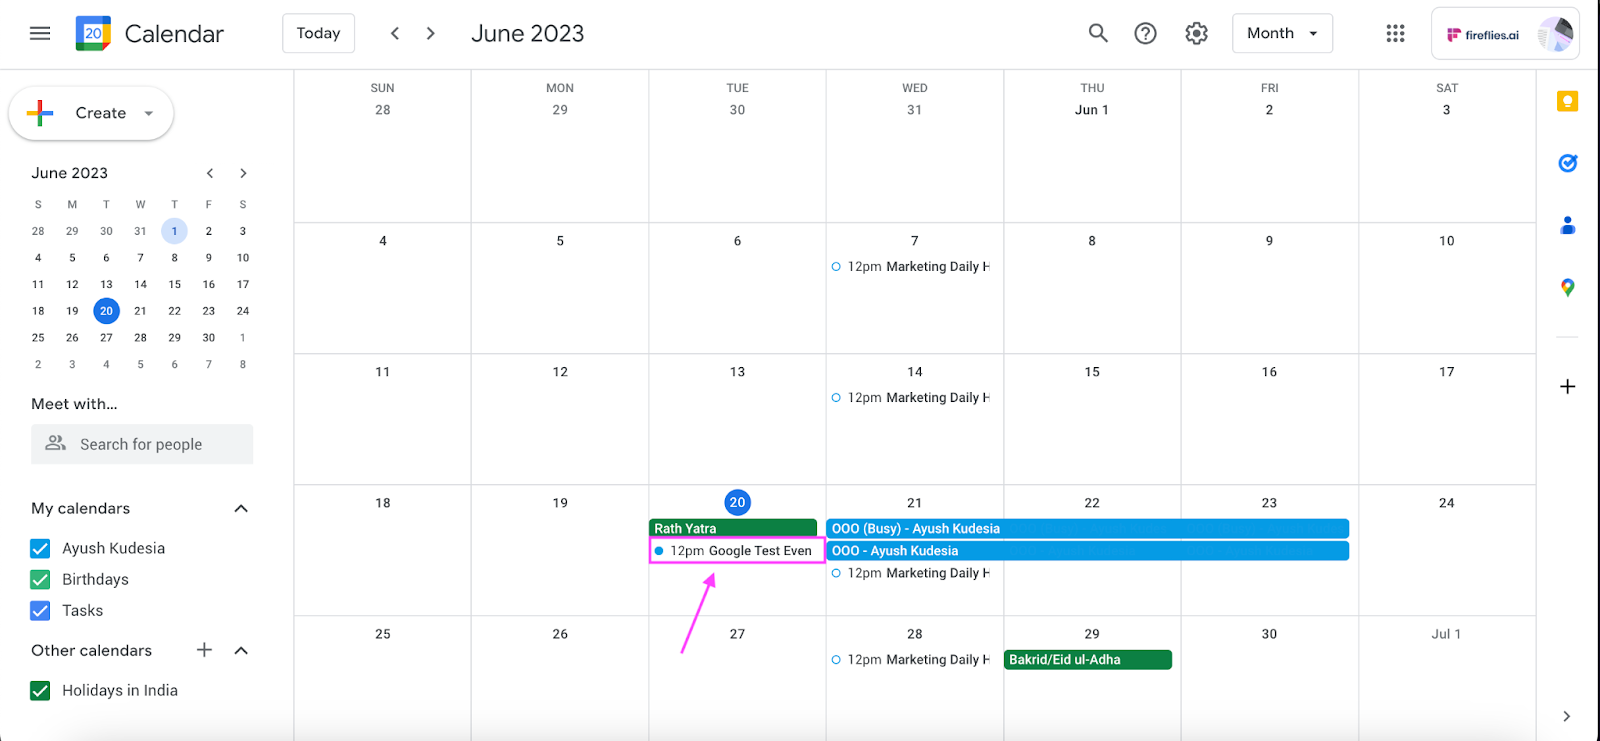 How to cancel Google Calendar event - Locate the event you want to cancel